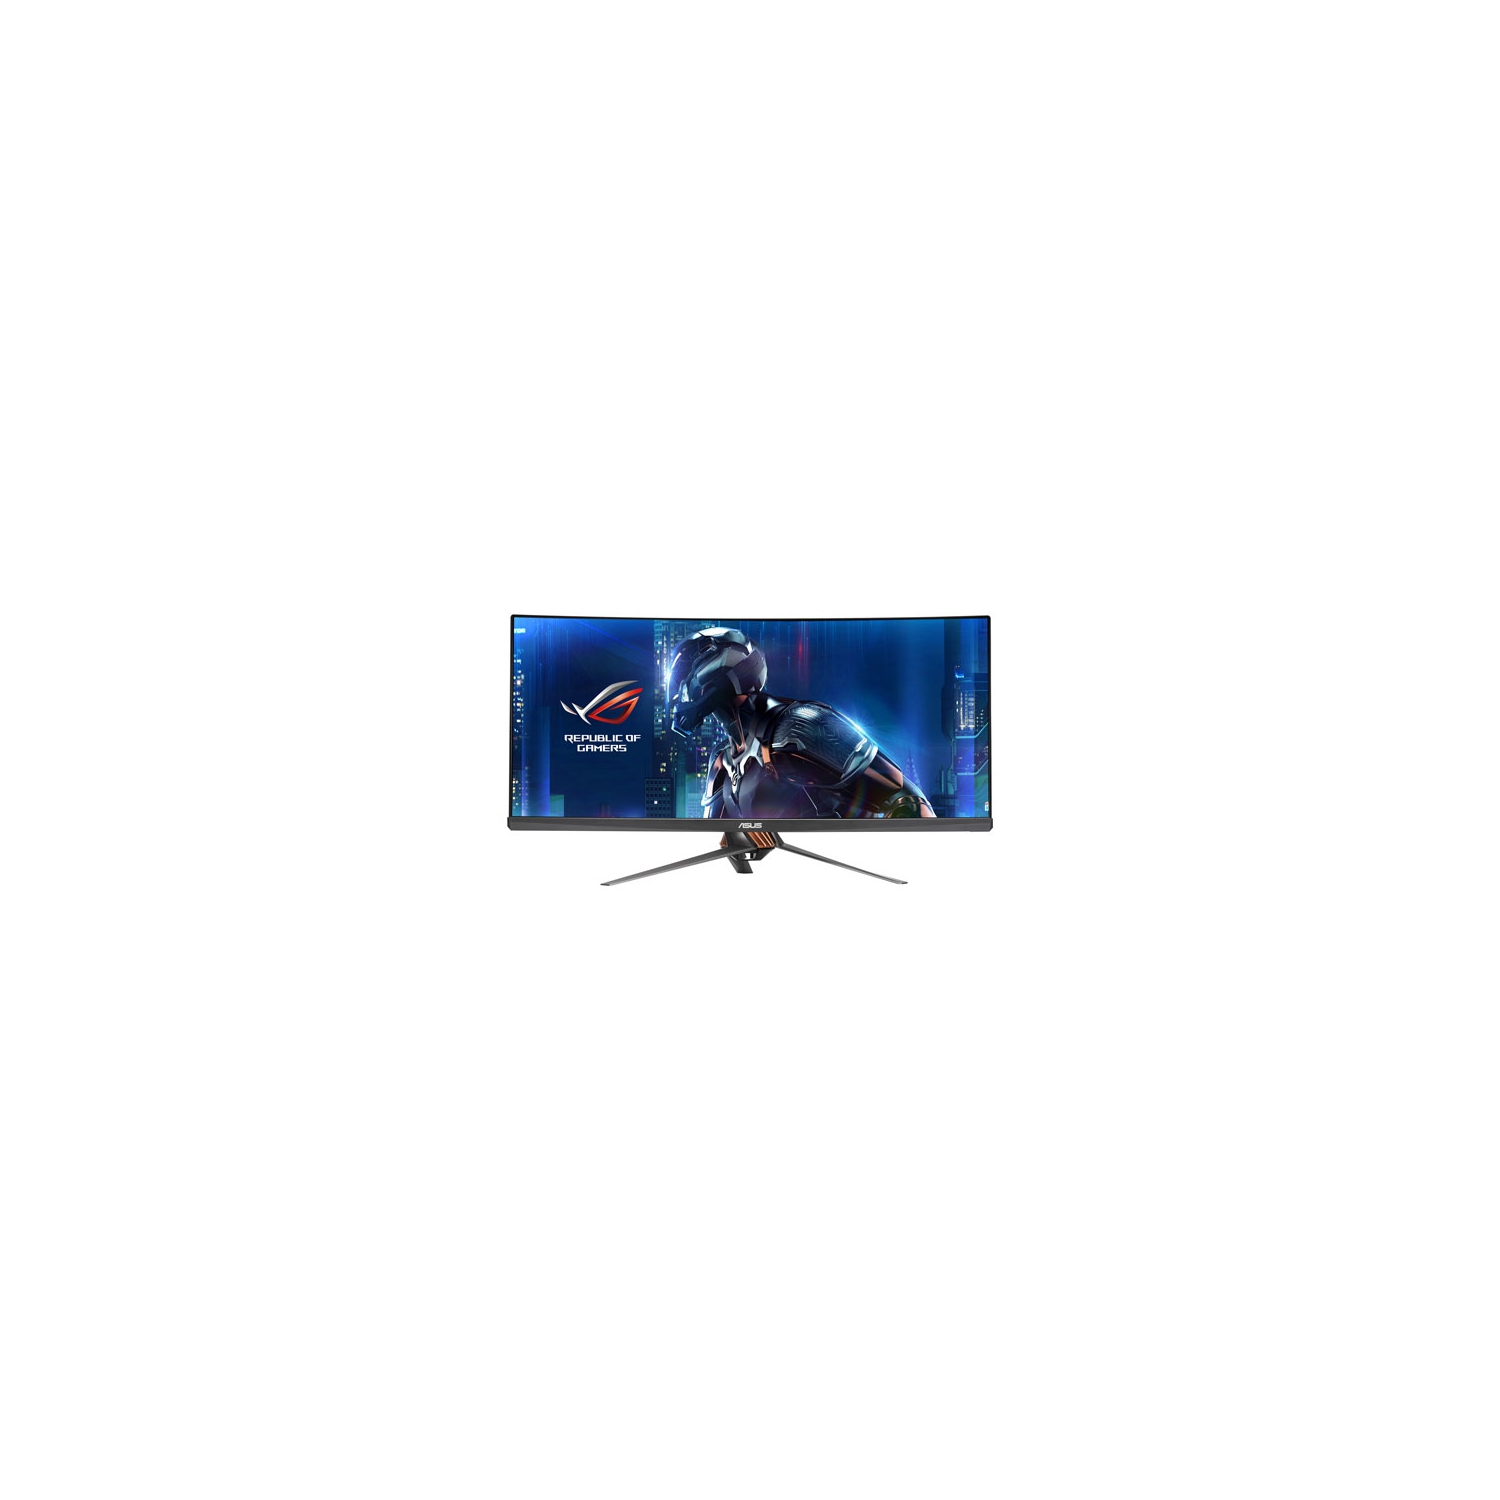 Refurbished (Excellent) - ASUS 34" ROG Swift Ultrawide WQHD 5ms GTG Curved IPS LED G-Sync Gaming Monitor (PG348Q)